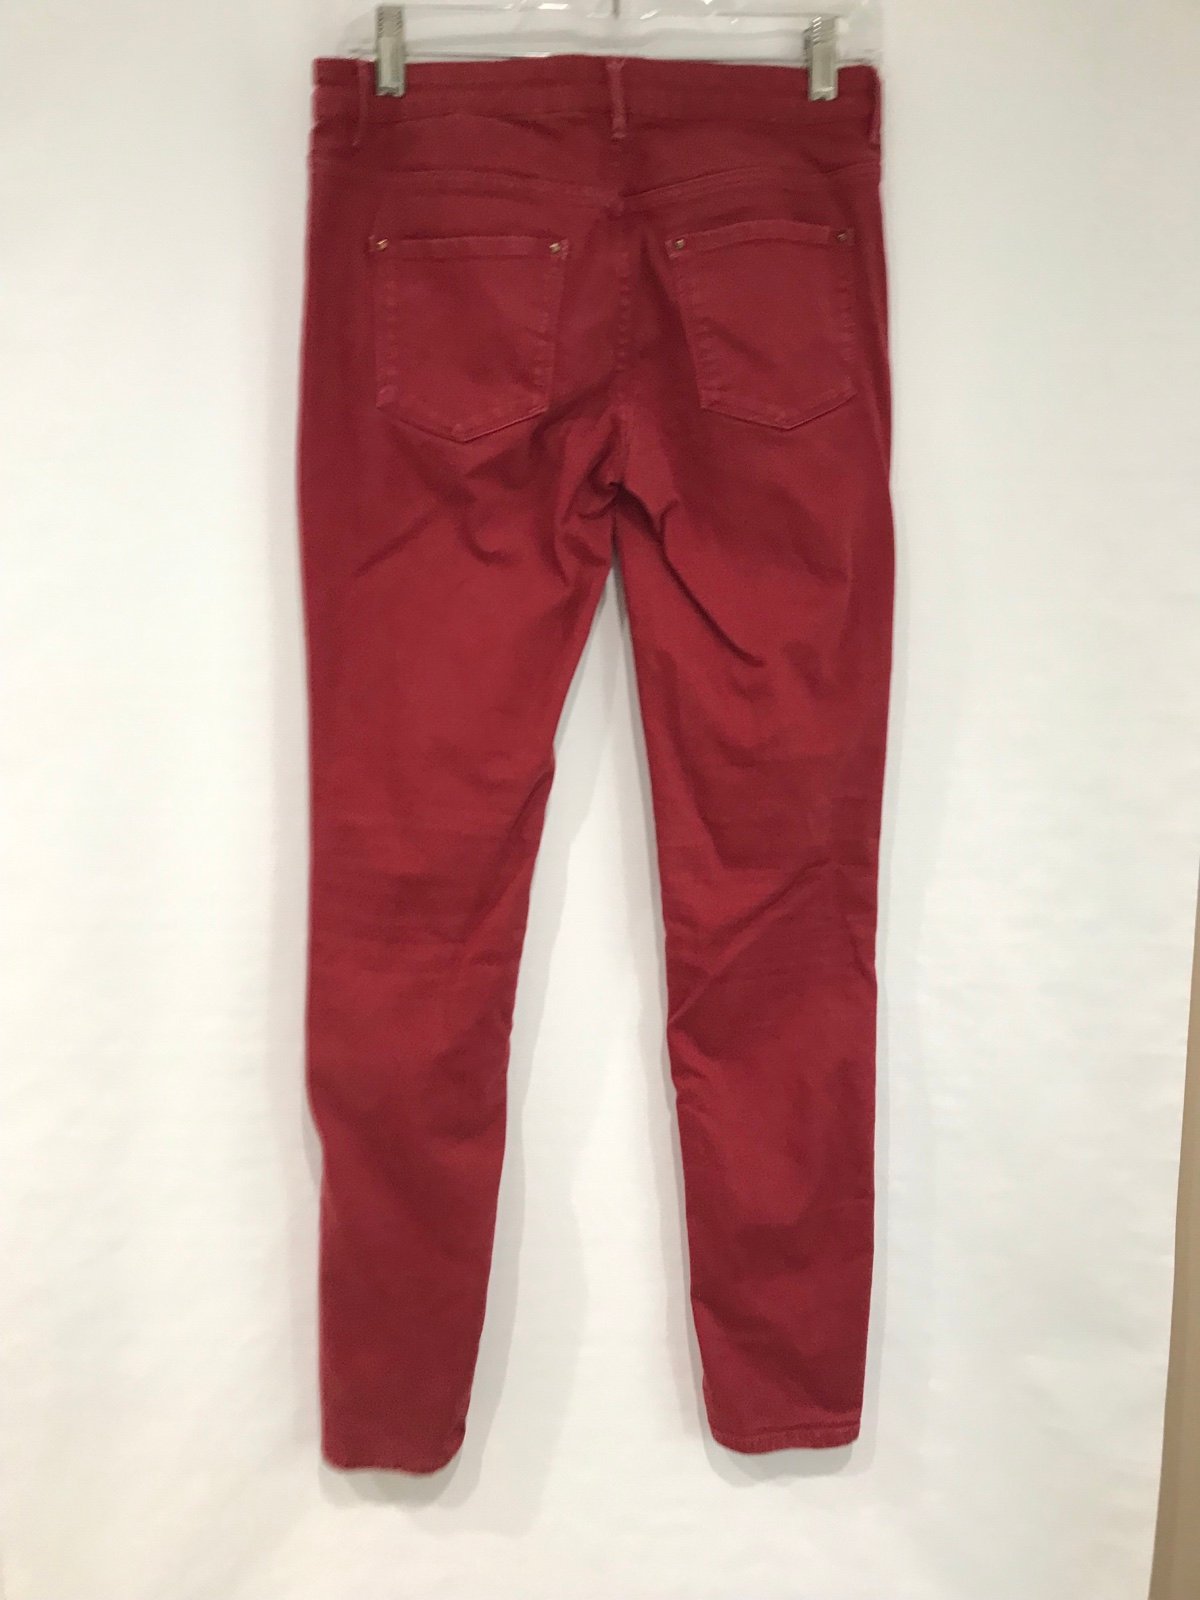 Simple Massimo Dutti Woman’s Slim Fit Jeans, Size 4 JqH4bxvy1 Factory Price